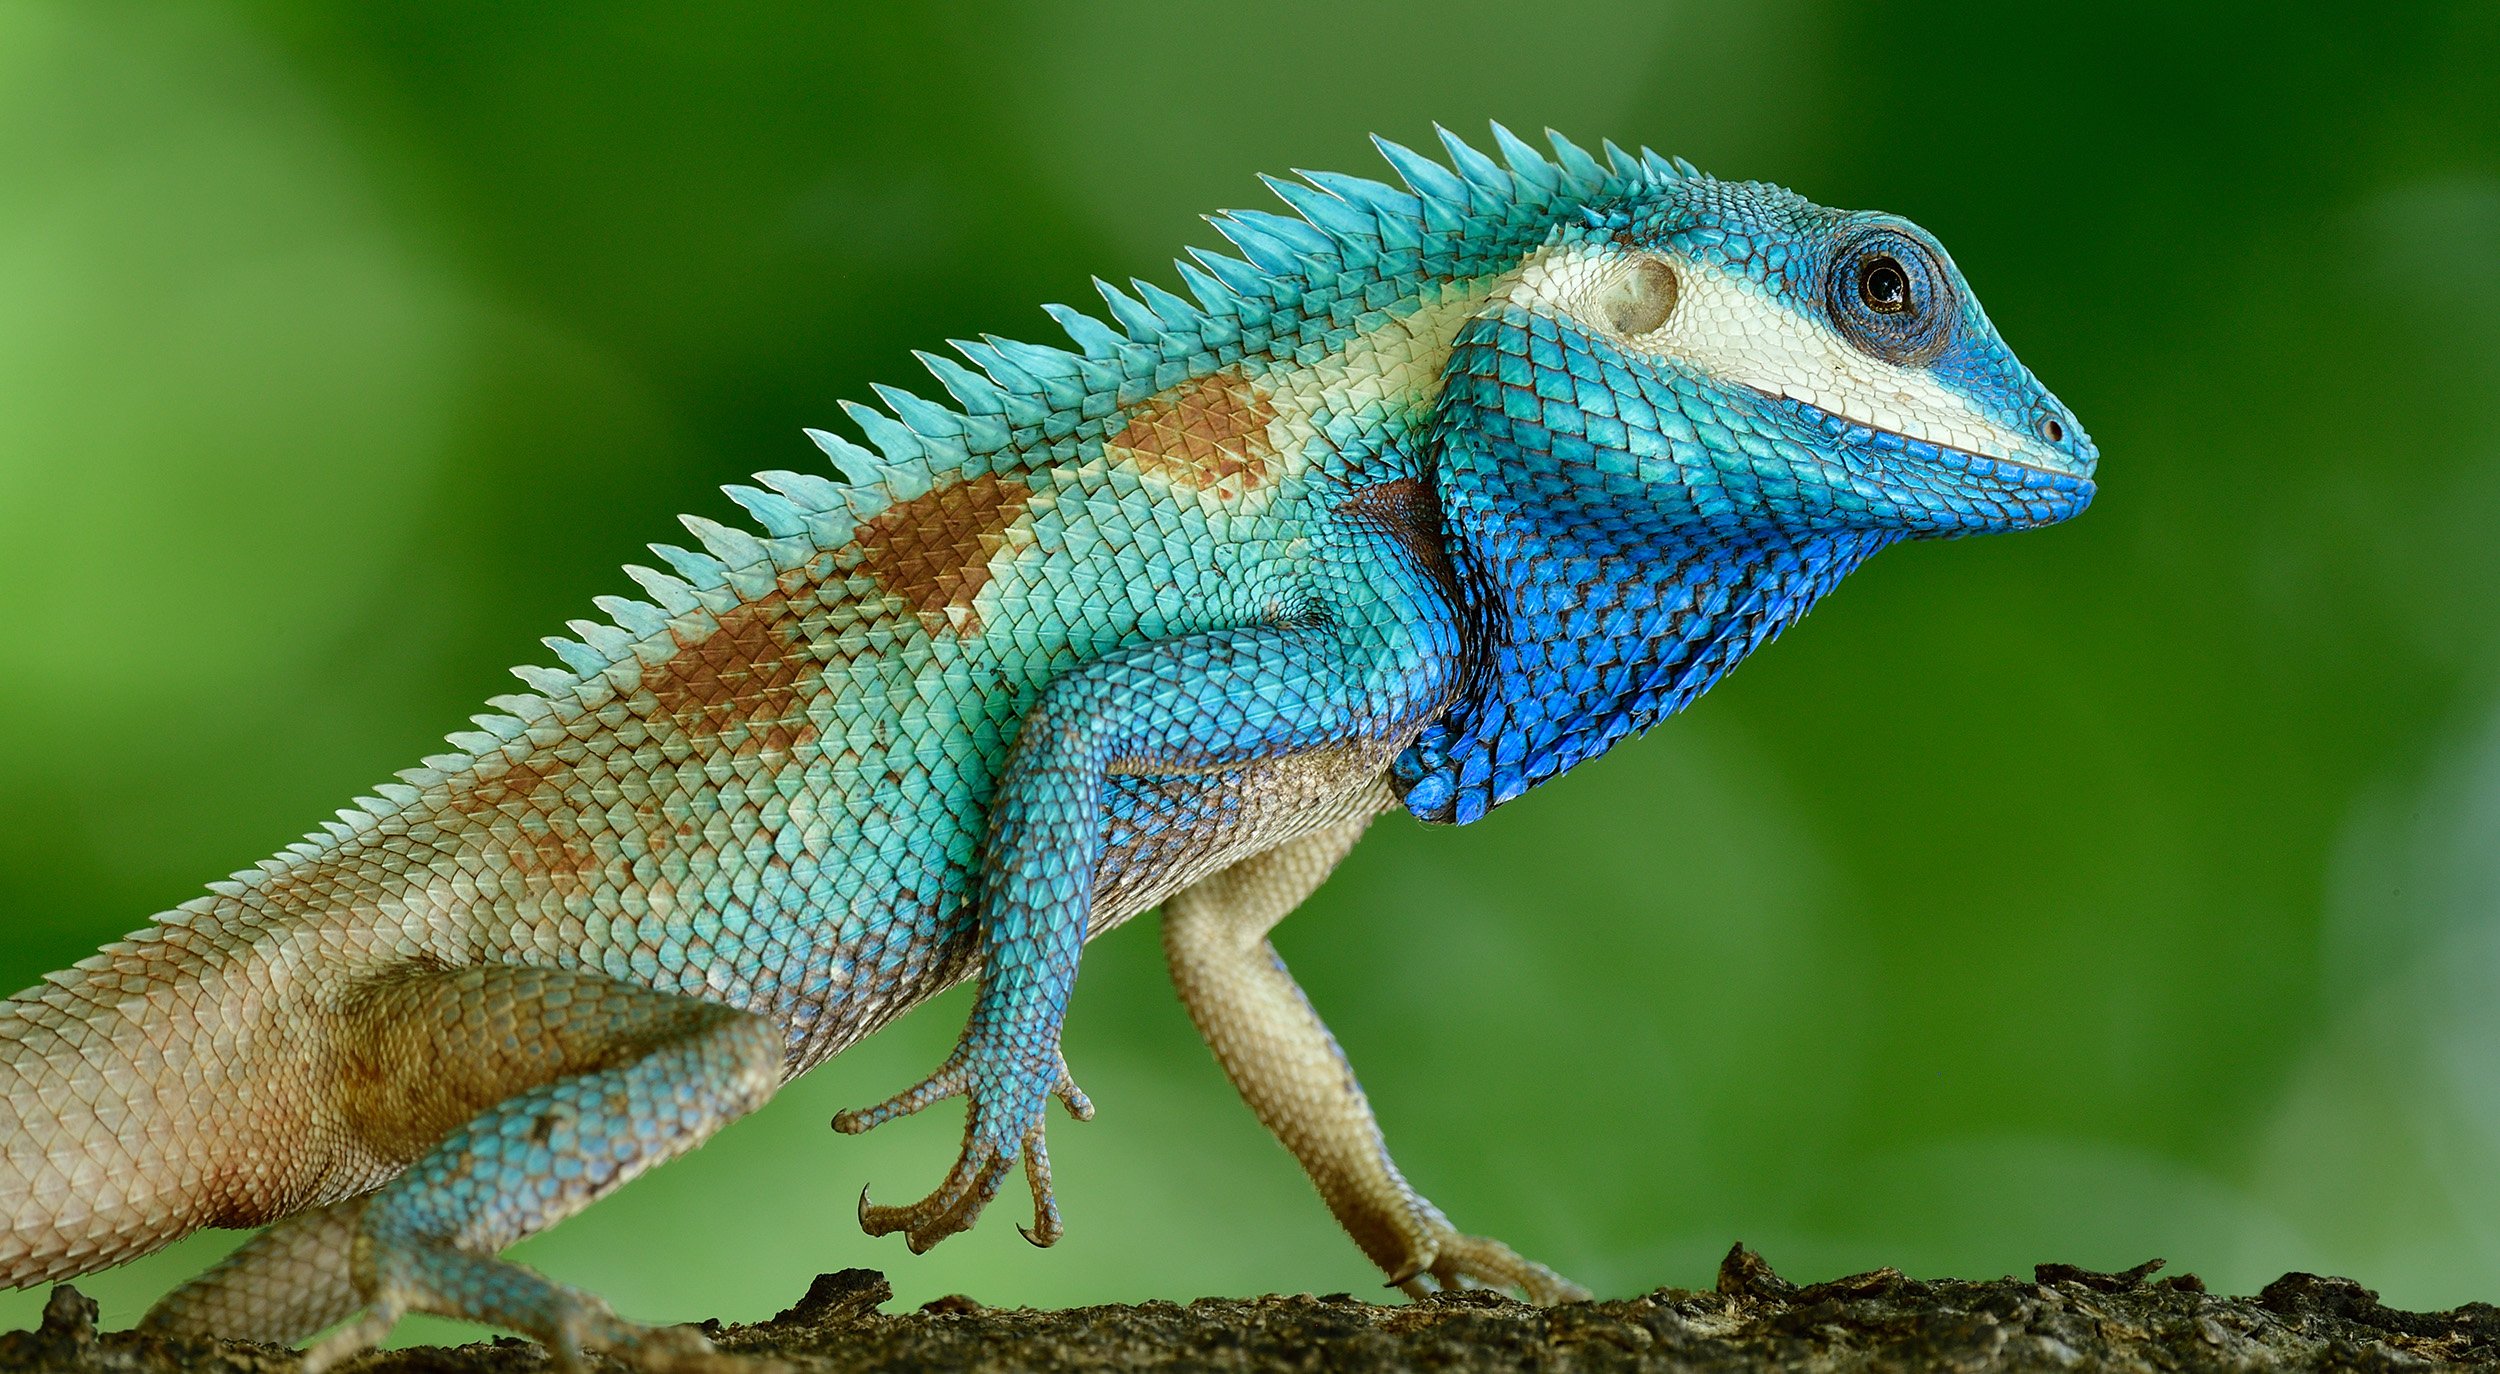 Is blue crested gecko rare?